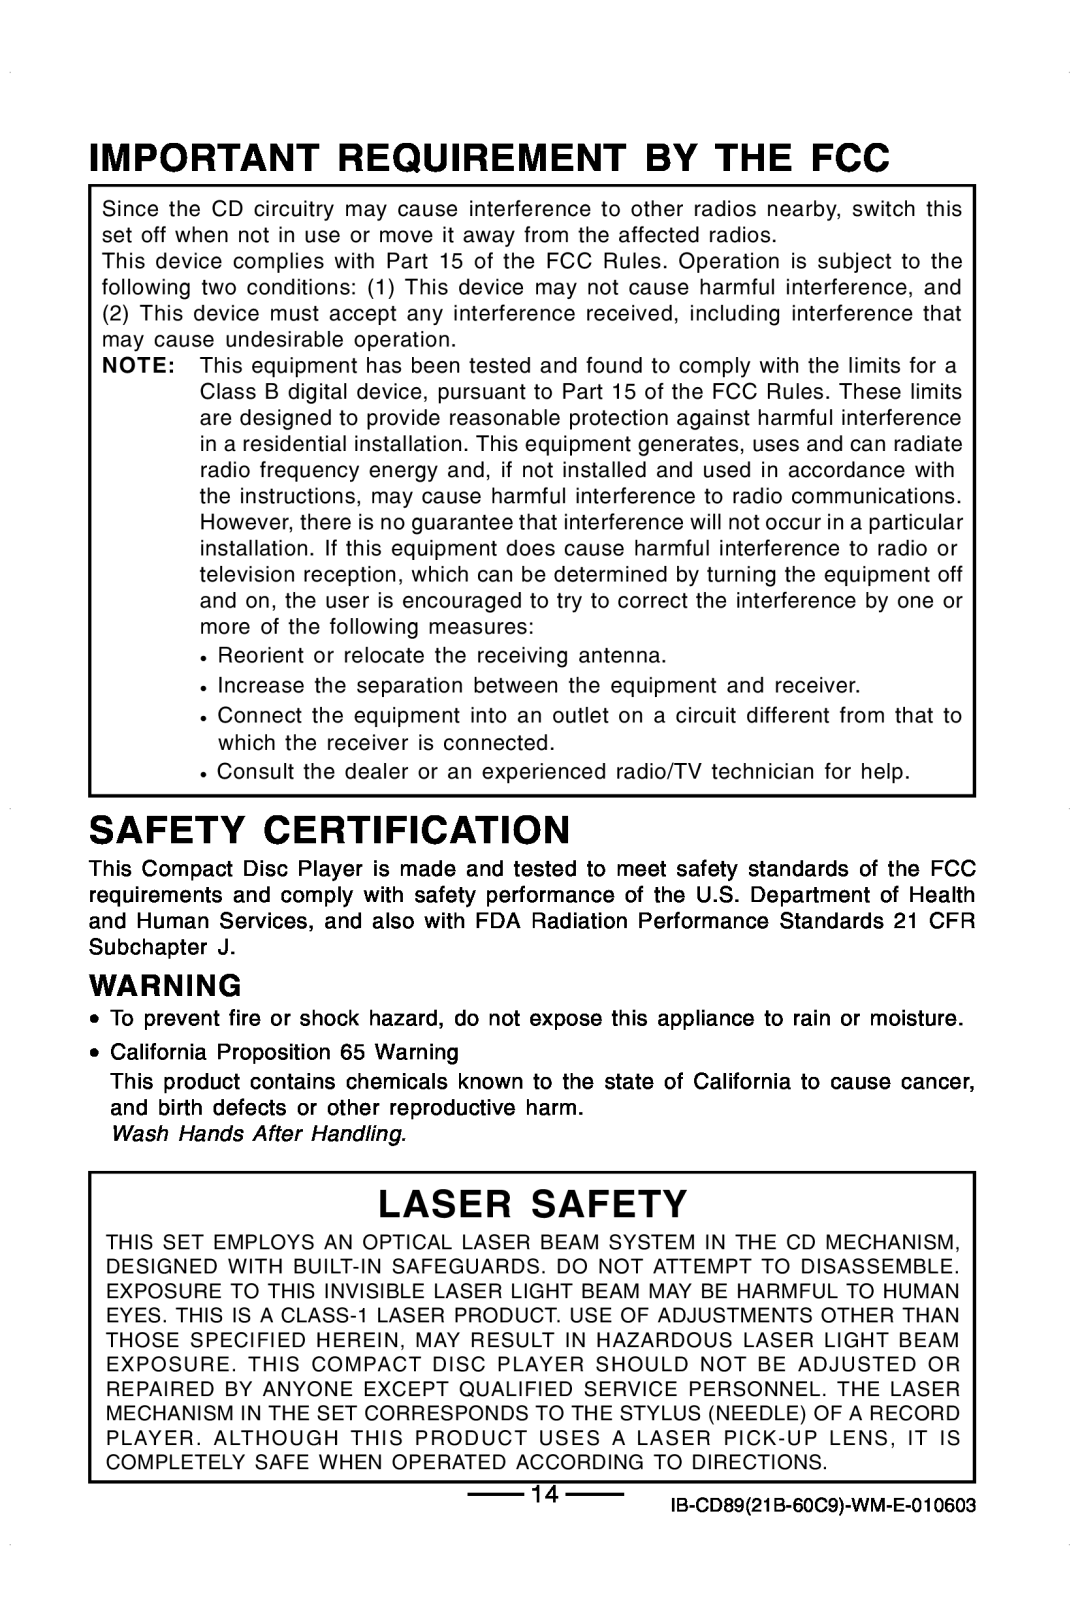 Lenoxx Electronics CD-89 manual Important Requirement By The Fcc, Safety Certification, Laser Safety 